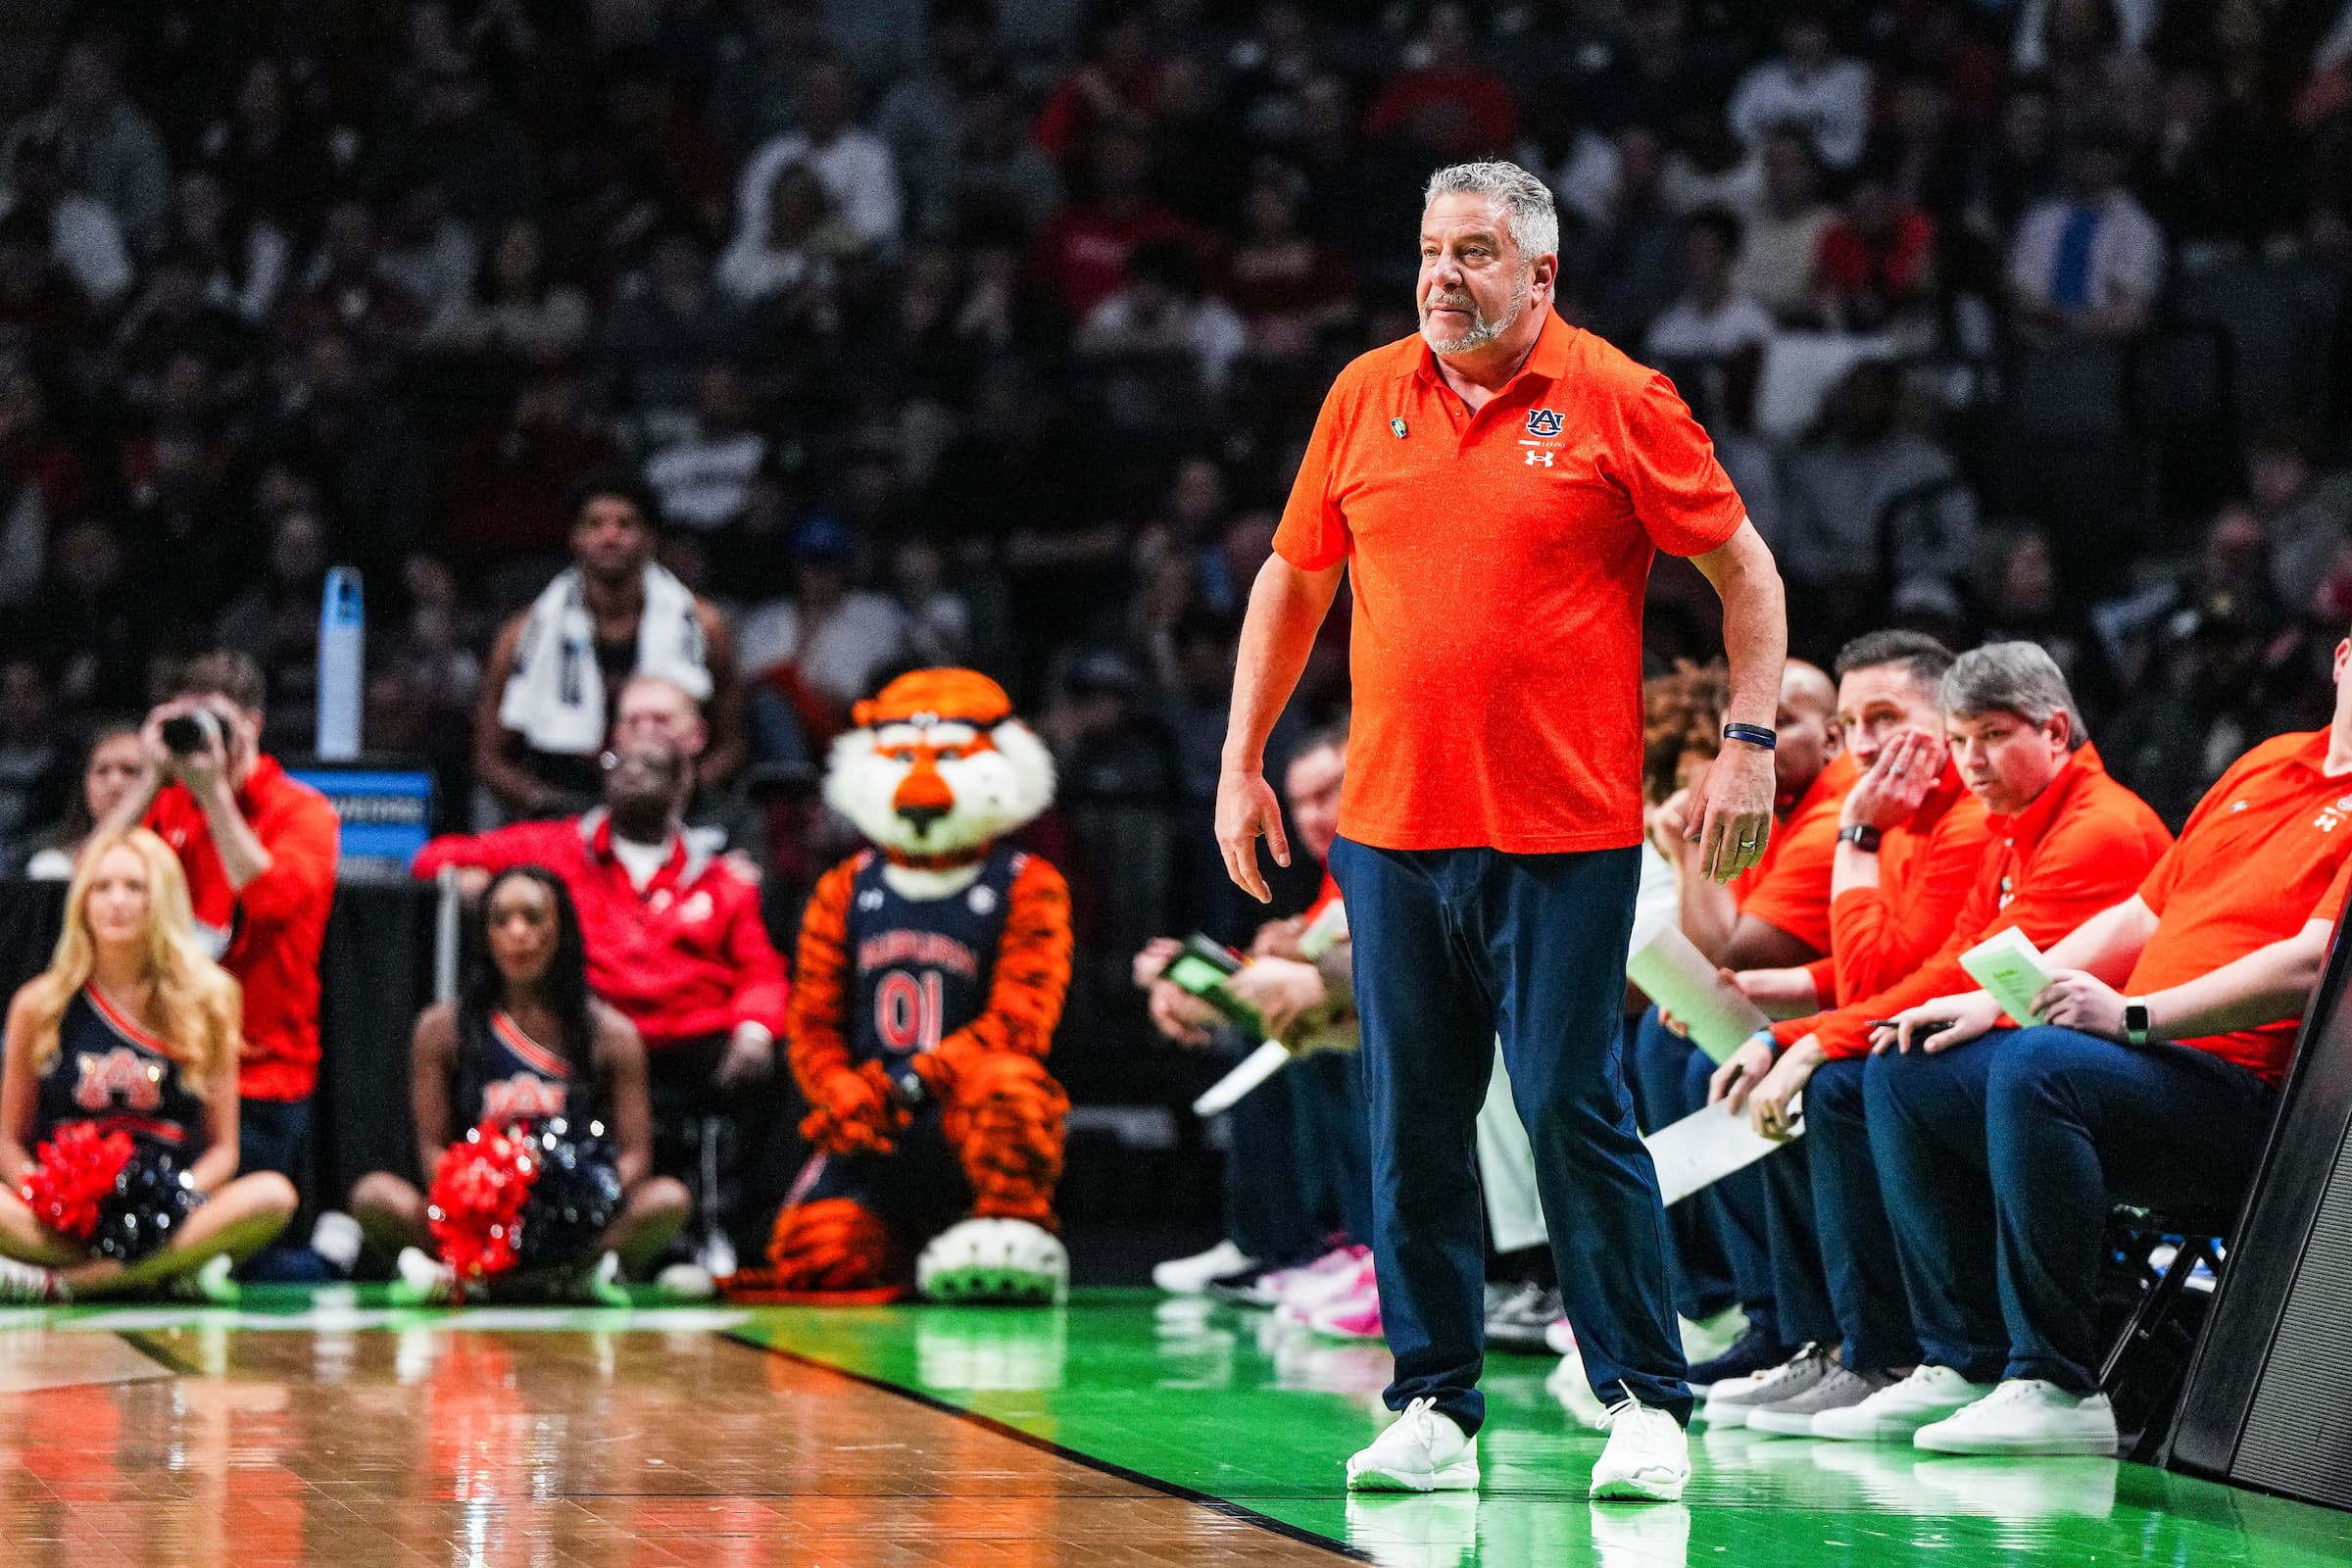 Bruce Pearl during the game between the Houstan Cougars and the Auburn Tigers at Legacy Arena in Birmingham, AL on Saturday, Mar 18, 2023.